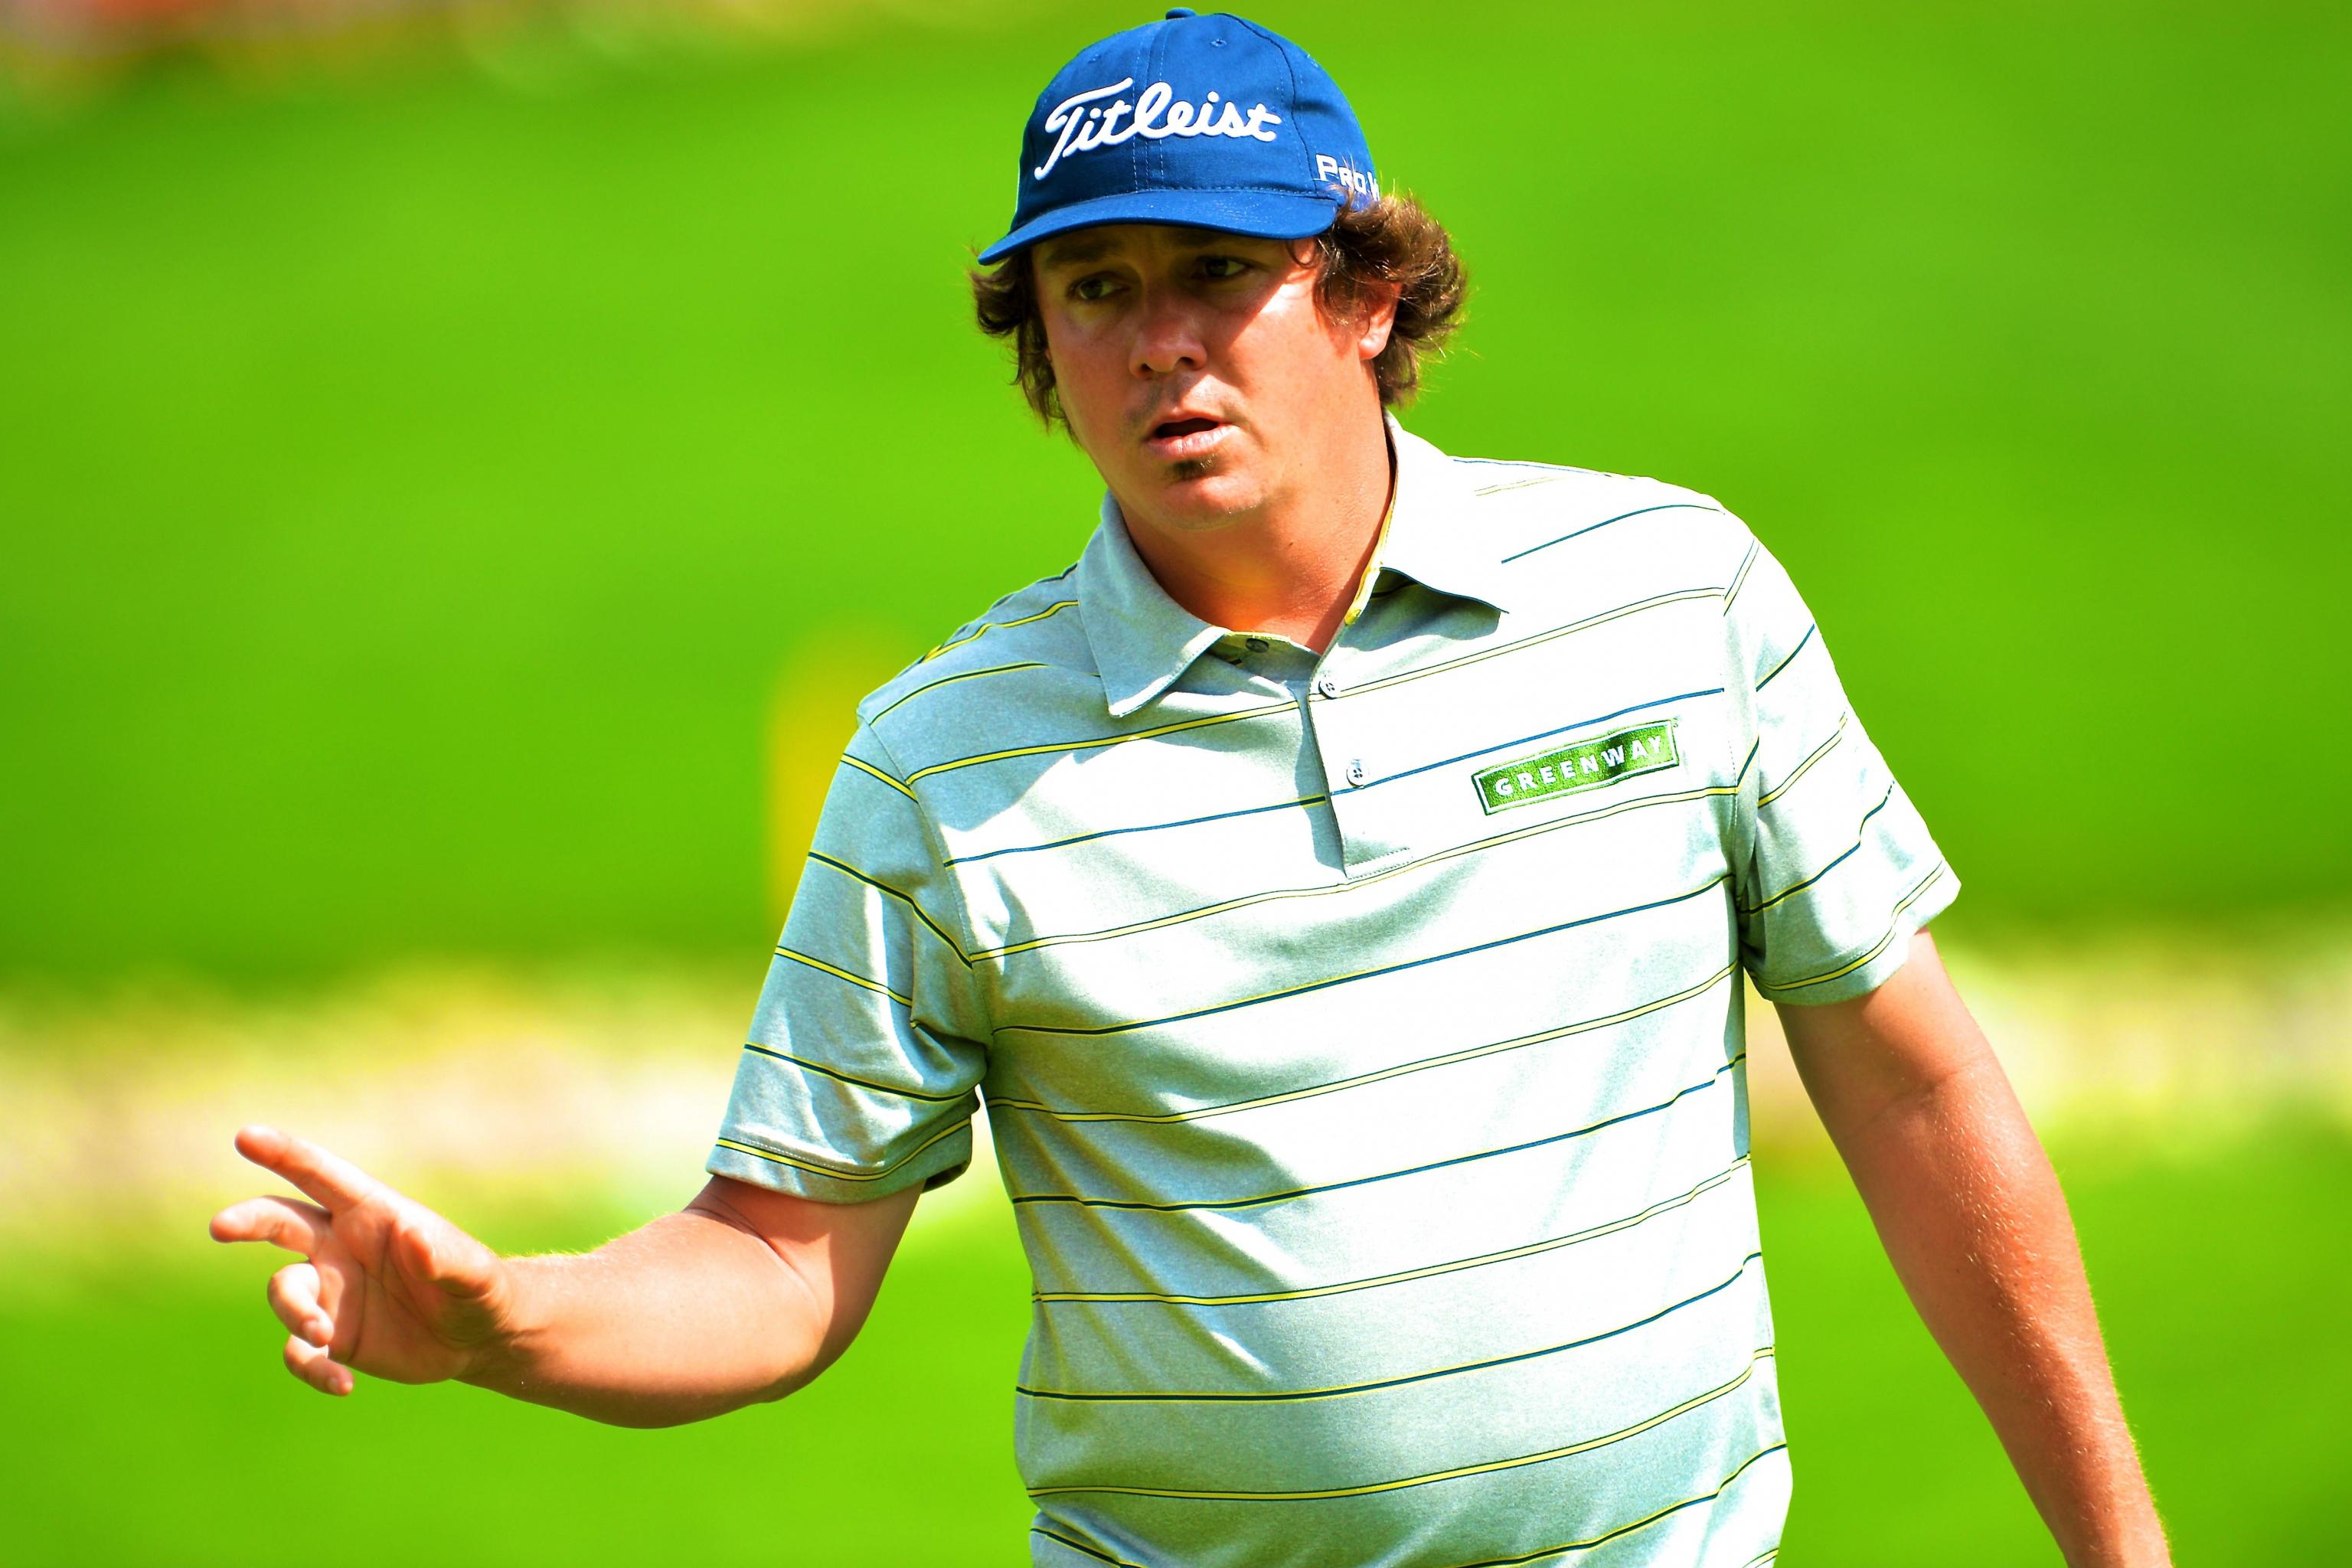 Jason Dufner Ties Major Record with 63 in Round 2 of PGA Championship.